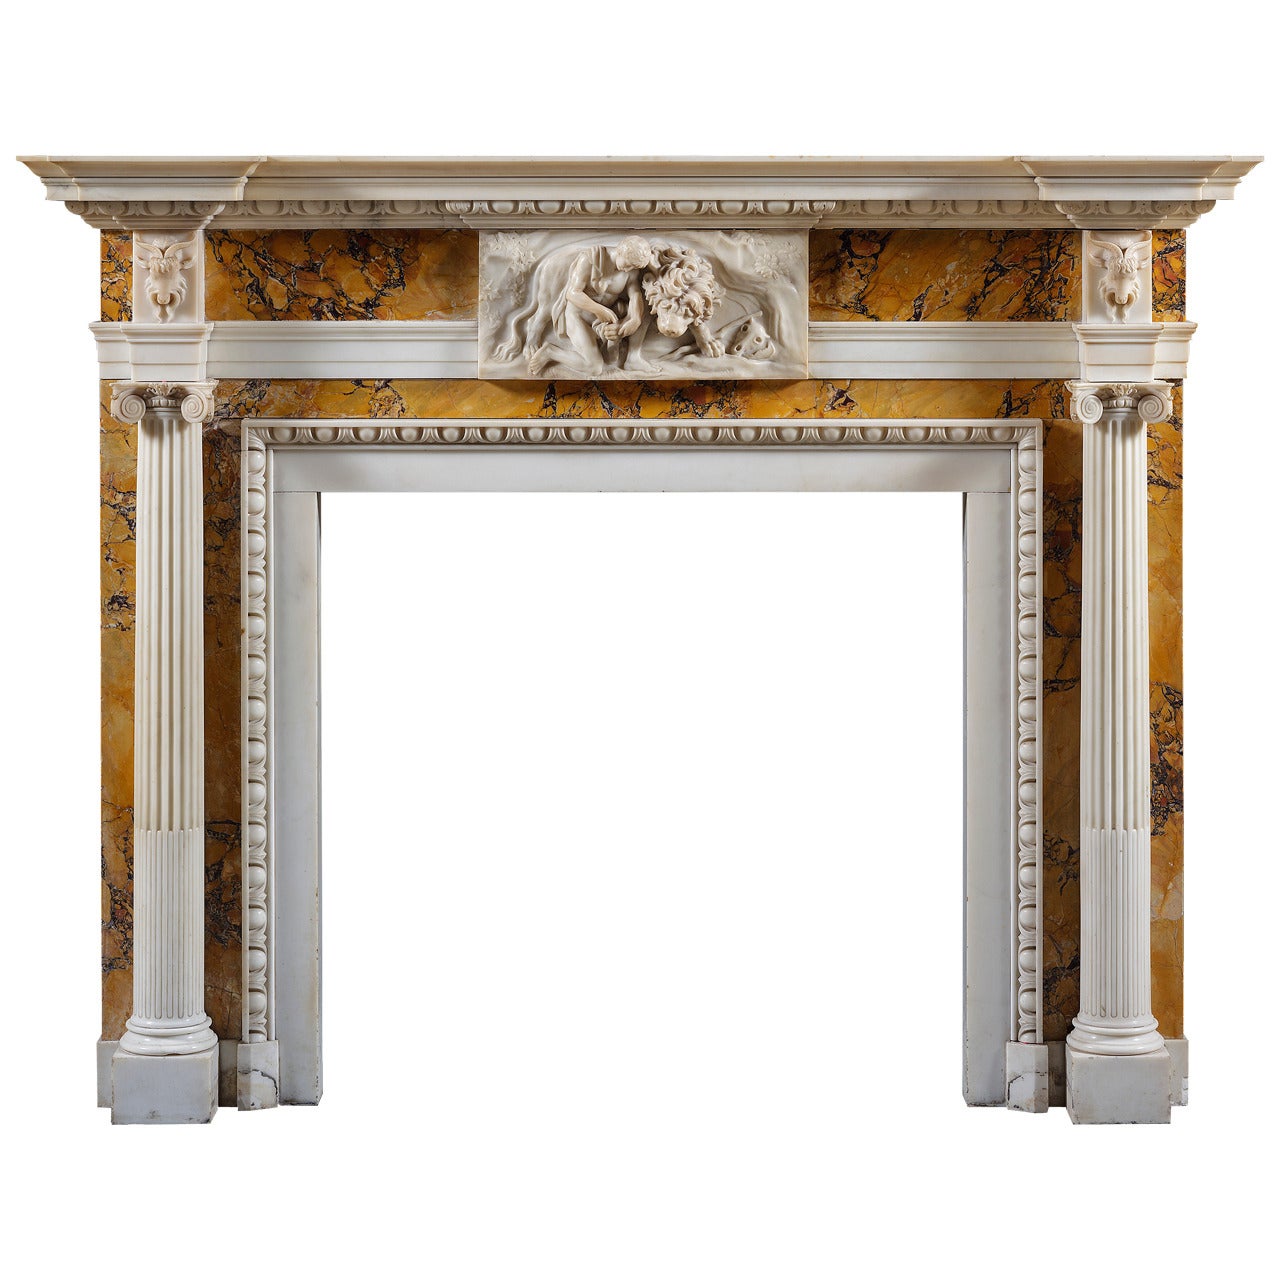 Antique George III Style White Statuary and Sienna Marble Fireplace Mantel